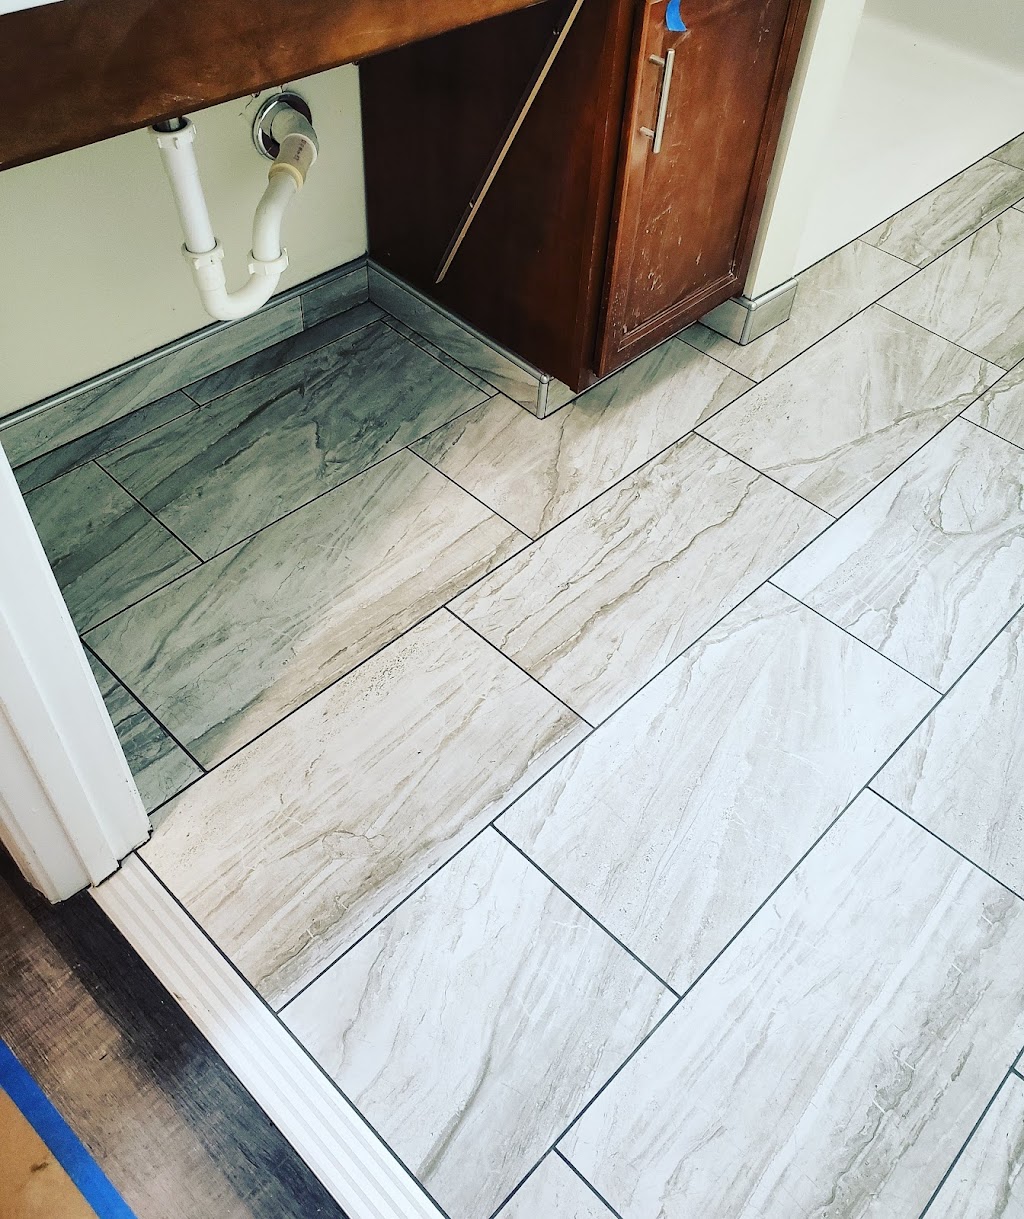 Terrys Tile and Marble | 1454 W Hebron Ln, Shepherdsville, KY 40165, USA | Phone: (502) 821-0555